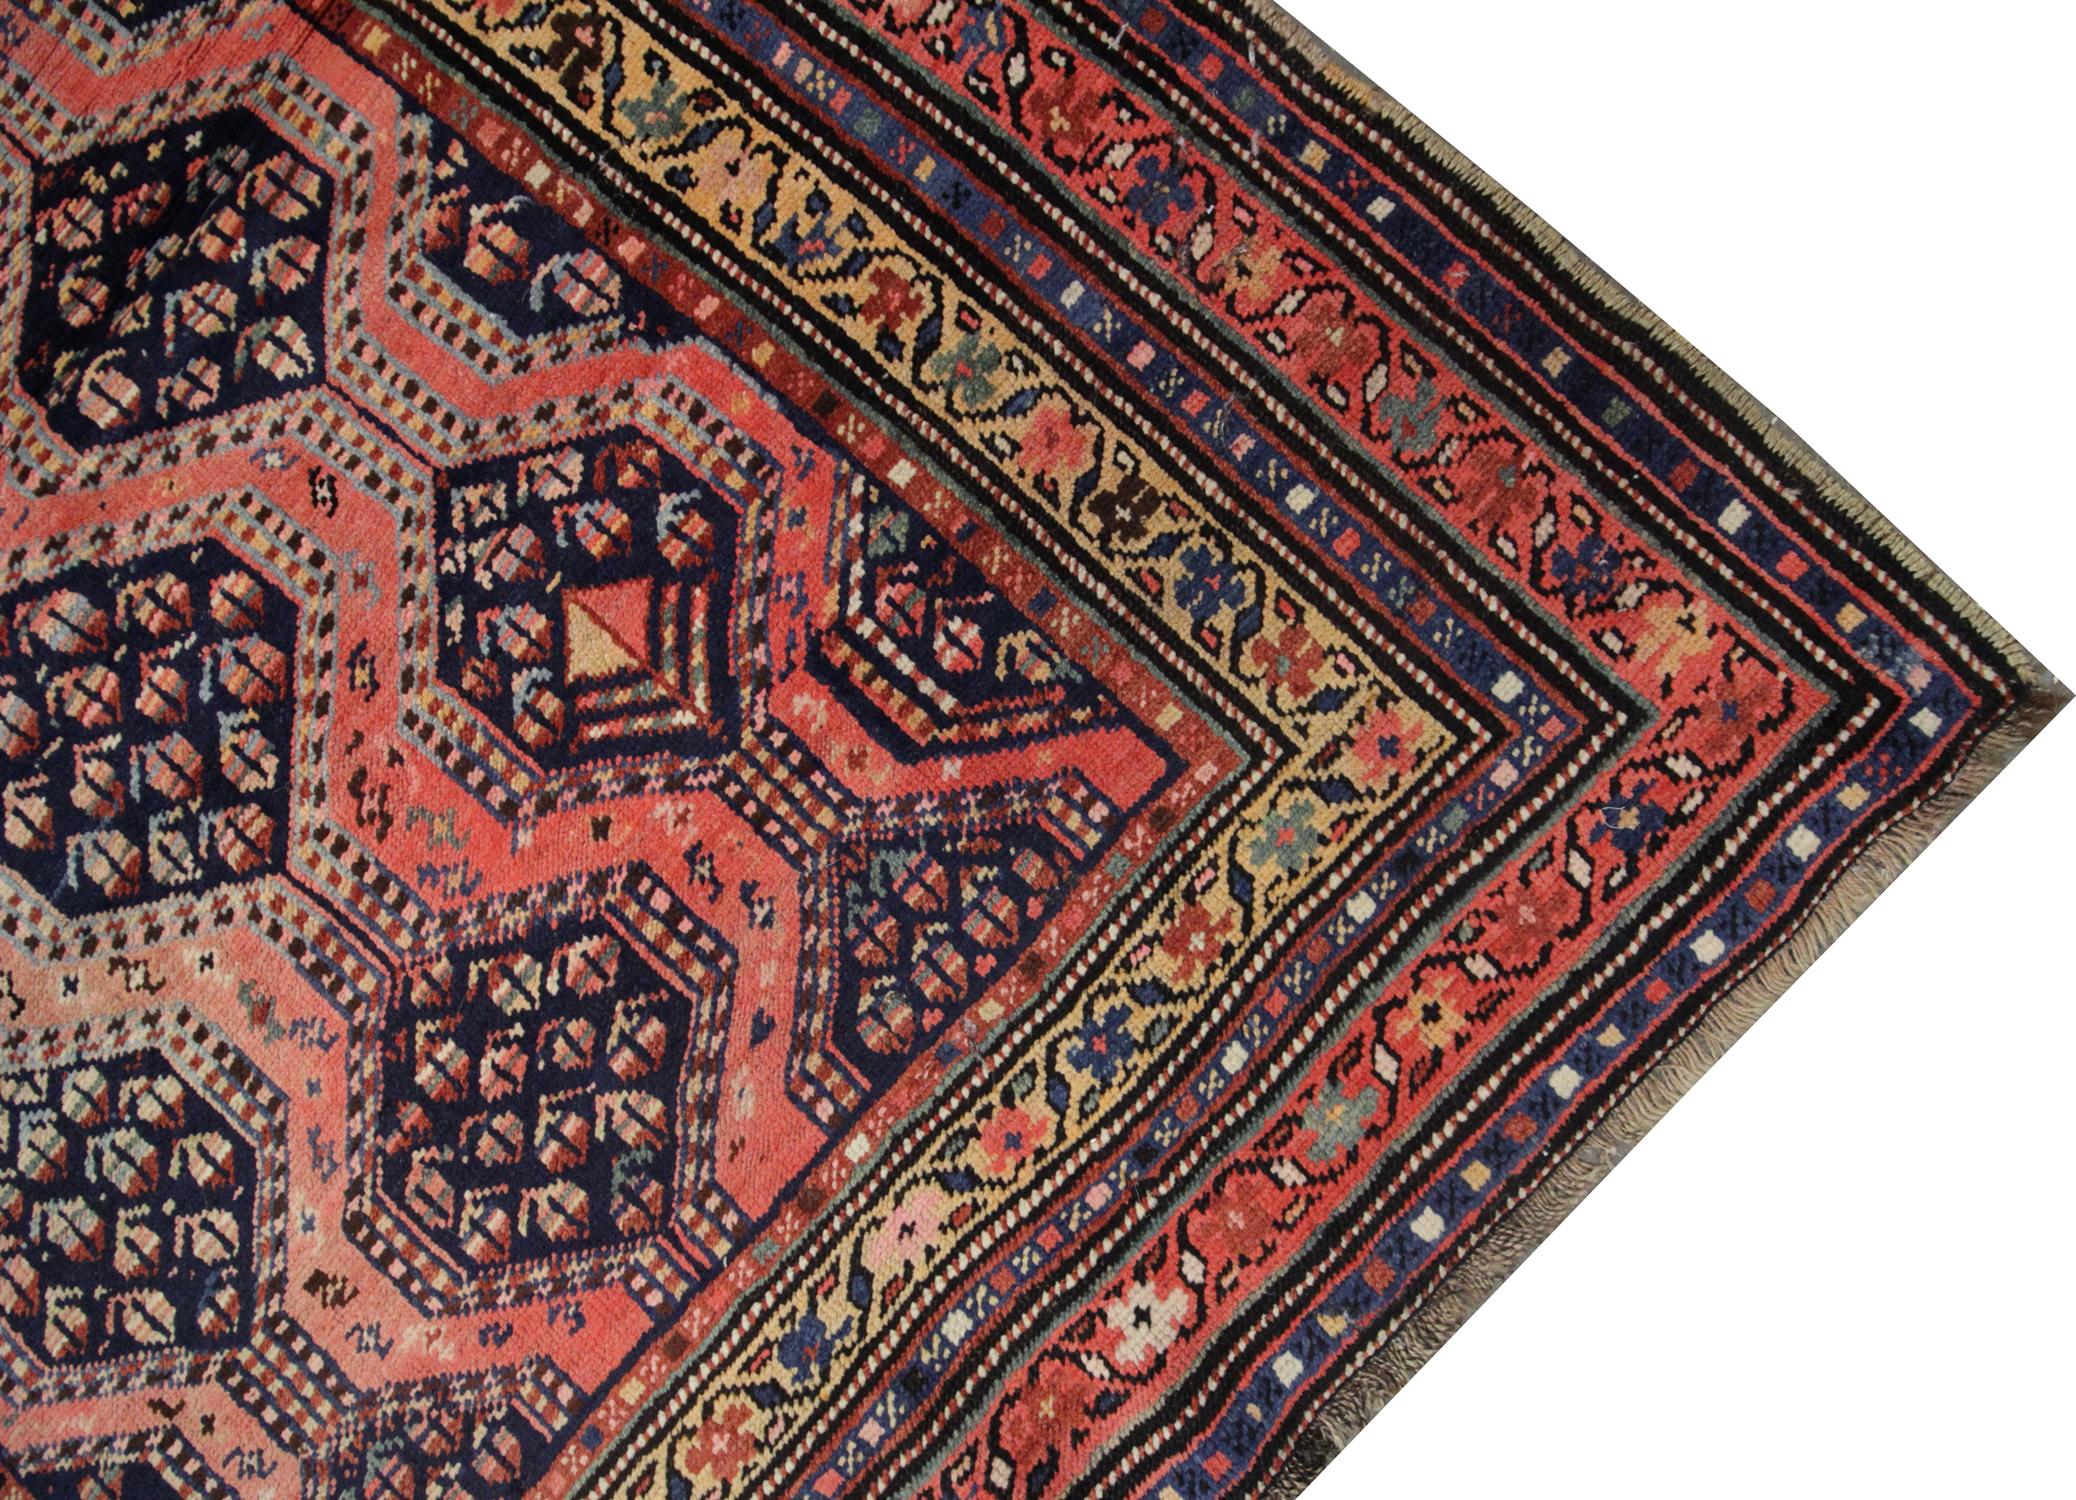 An excellent example of a traditional Caucasian carpet is Oriental rug weaving from the Kazak region. These Medallion ground design patterned rugs can be the best element of home decor objects to give warmth to the environment because this woven rug